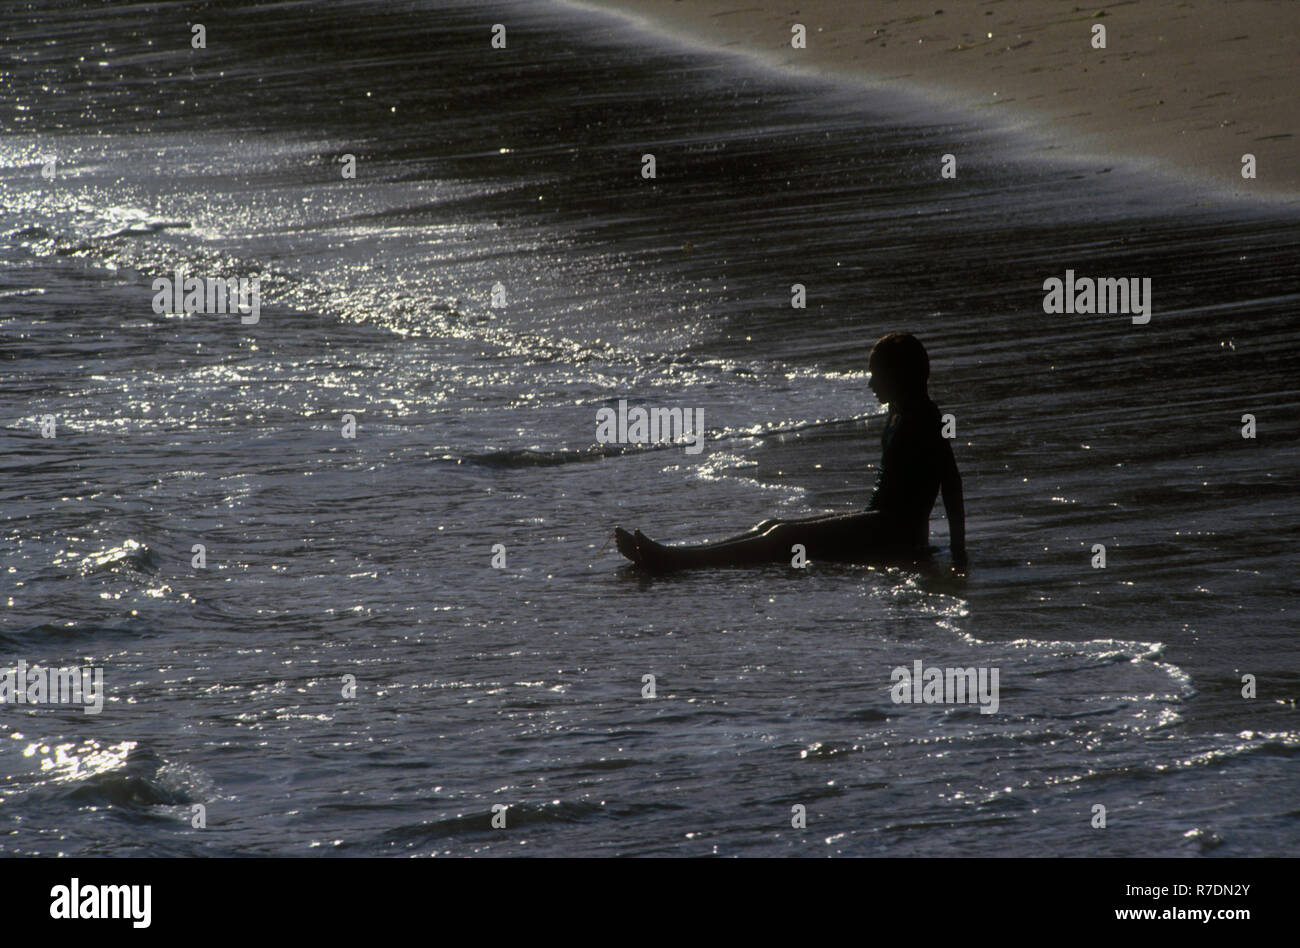 TEENAGE GIRL SITTING ALONE IN THE SURF, SHOAL BAY, NEW SOUTH WALES, AUSTRALIA Stock Photo